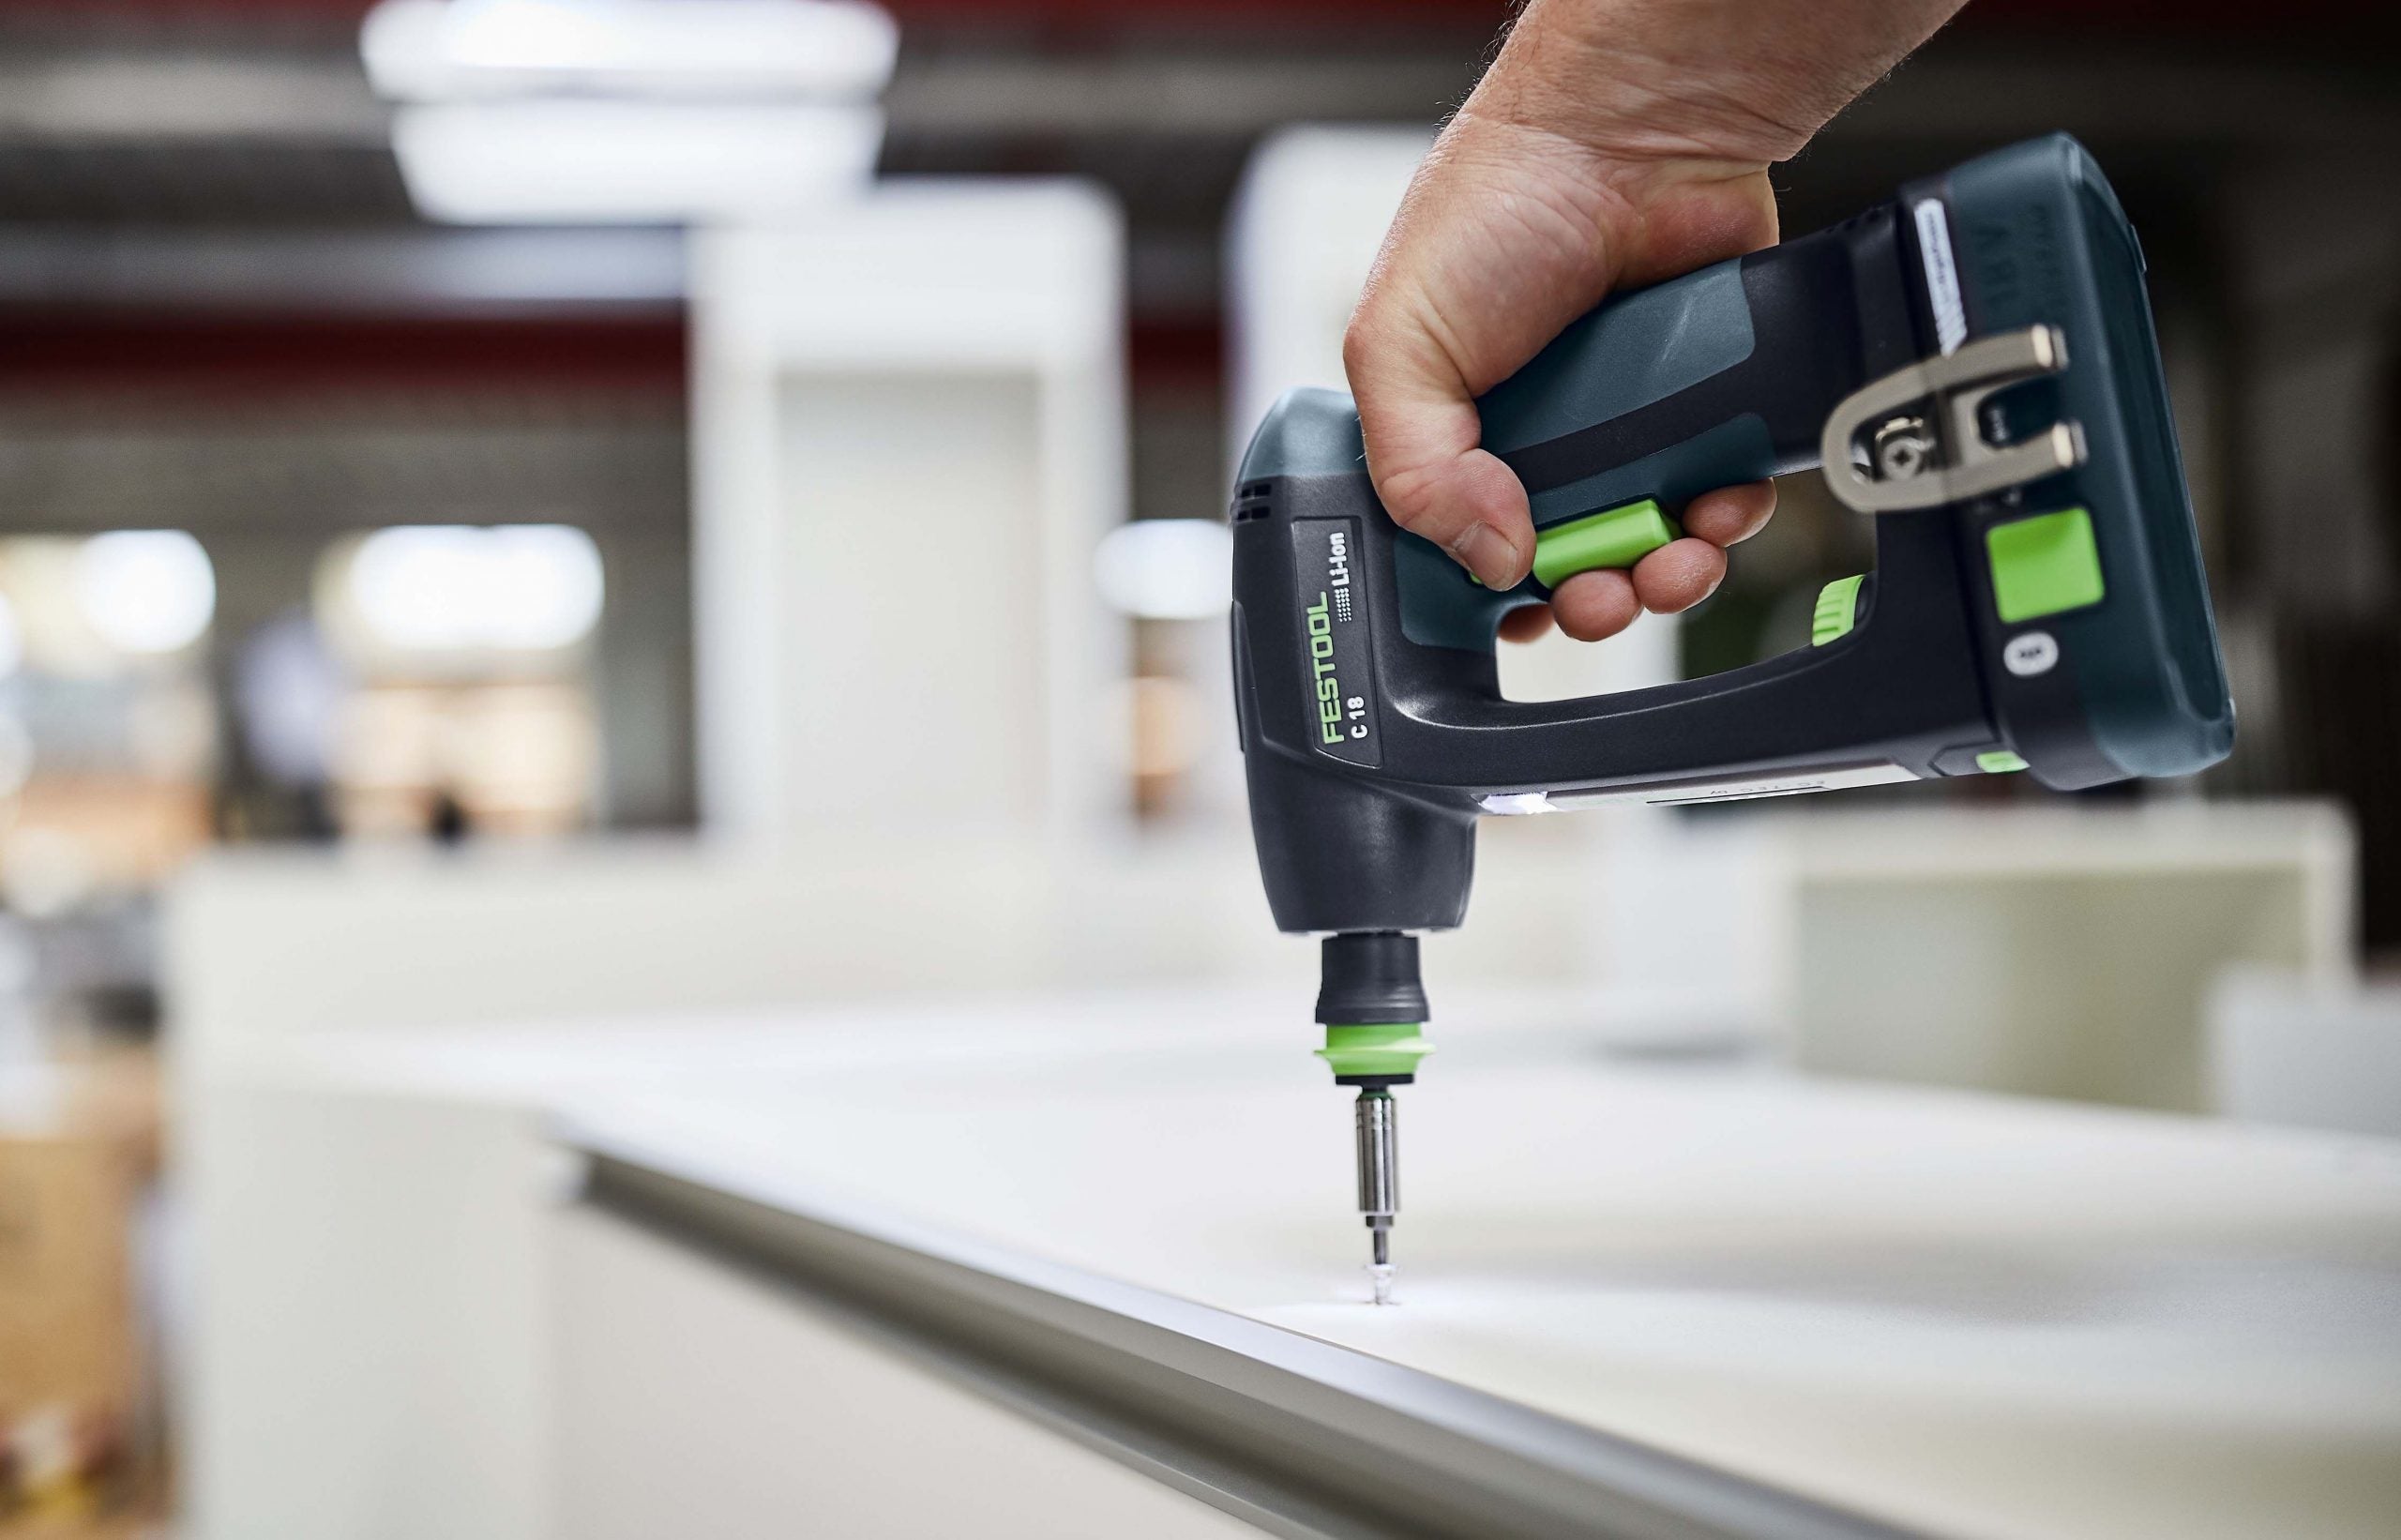 18V Cordless 2 Speed Basic Drill in Systainer 576434 by Festool